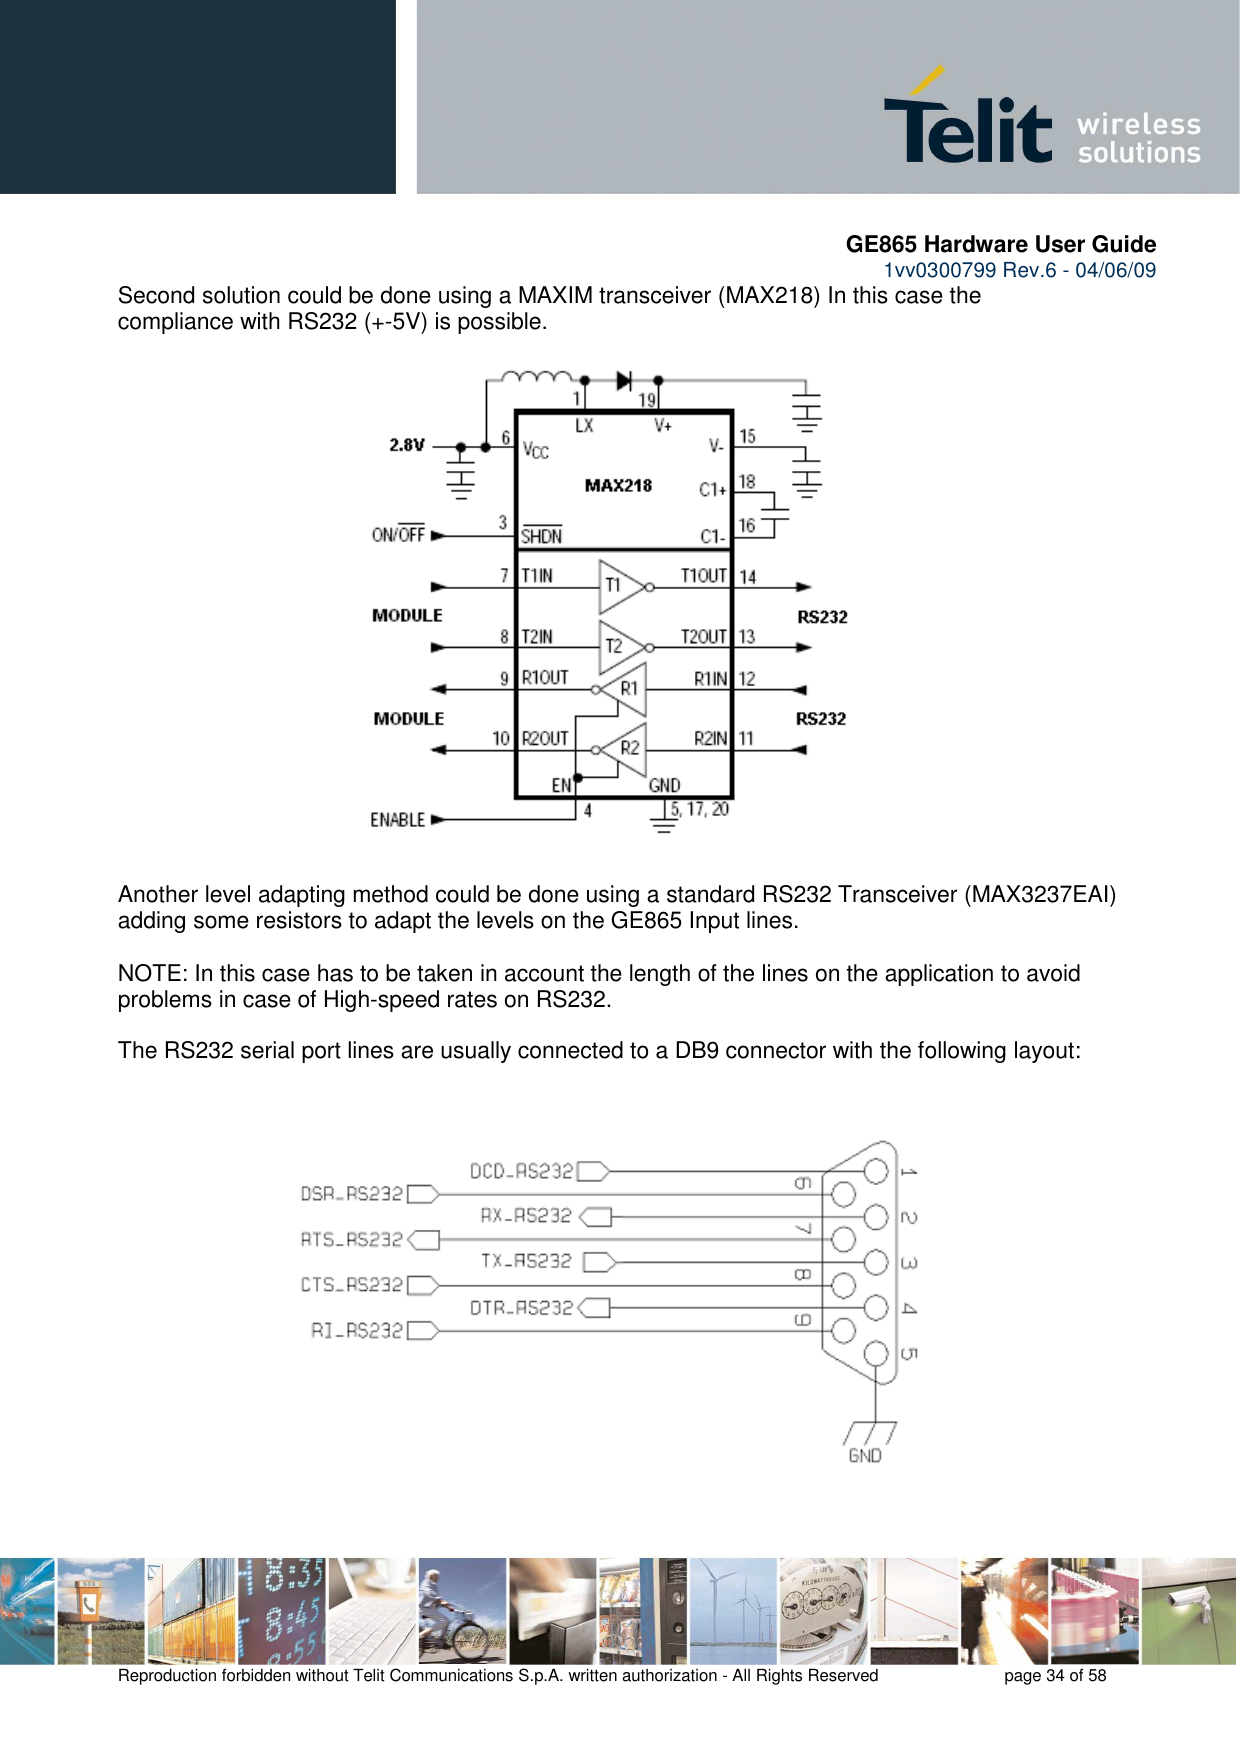       GE865 Hardware User Guide 1vv0300799 Rev.6 - 04/06/09      Reproduction forbidden without Telit Communications S.p.A. written authorization - All Rights Reserved    page 34 of 58  Second solution could be done using a MAXIM transceiver (MAX218) In this case the compliance with RS232 (+-5V) is possible.                      Another level adapting method could be done using a standard RS232 Transceiver (MAX3237EAI) adding some resistors to adapt the levels on the GE865 Input lines.  NOTE: In this case has to be taken in account the length of the lines on the application to avoid problems in case of High-speed rates on RS232.  The RS232 serial port lines are usually connected to a DB9 connector with the following layout:    